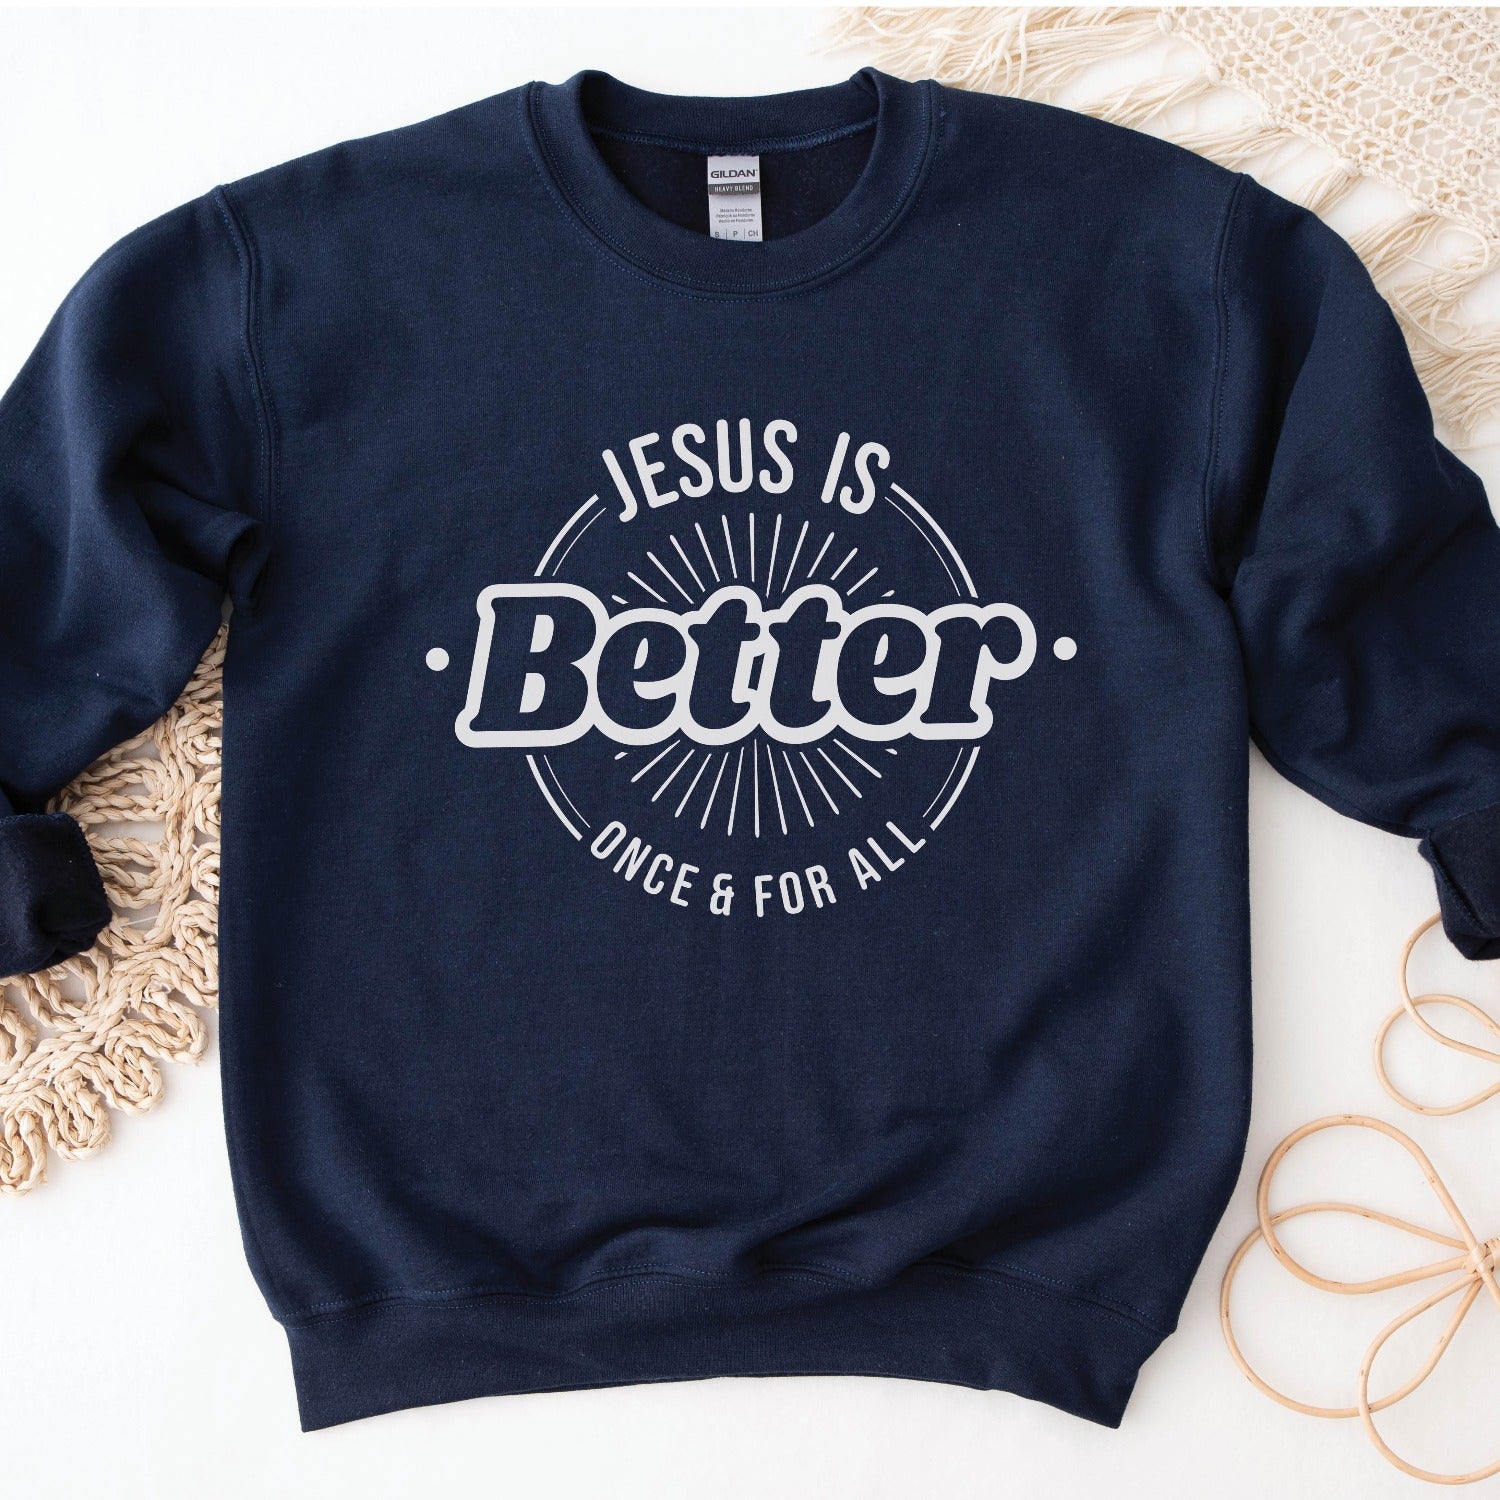 Navy blue color faith-based cozy sweatshirt with "Jesus is BETTER - Once and For All" logo style design in white, created for Christian men and women